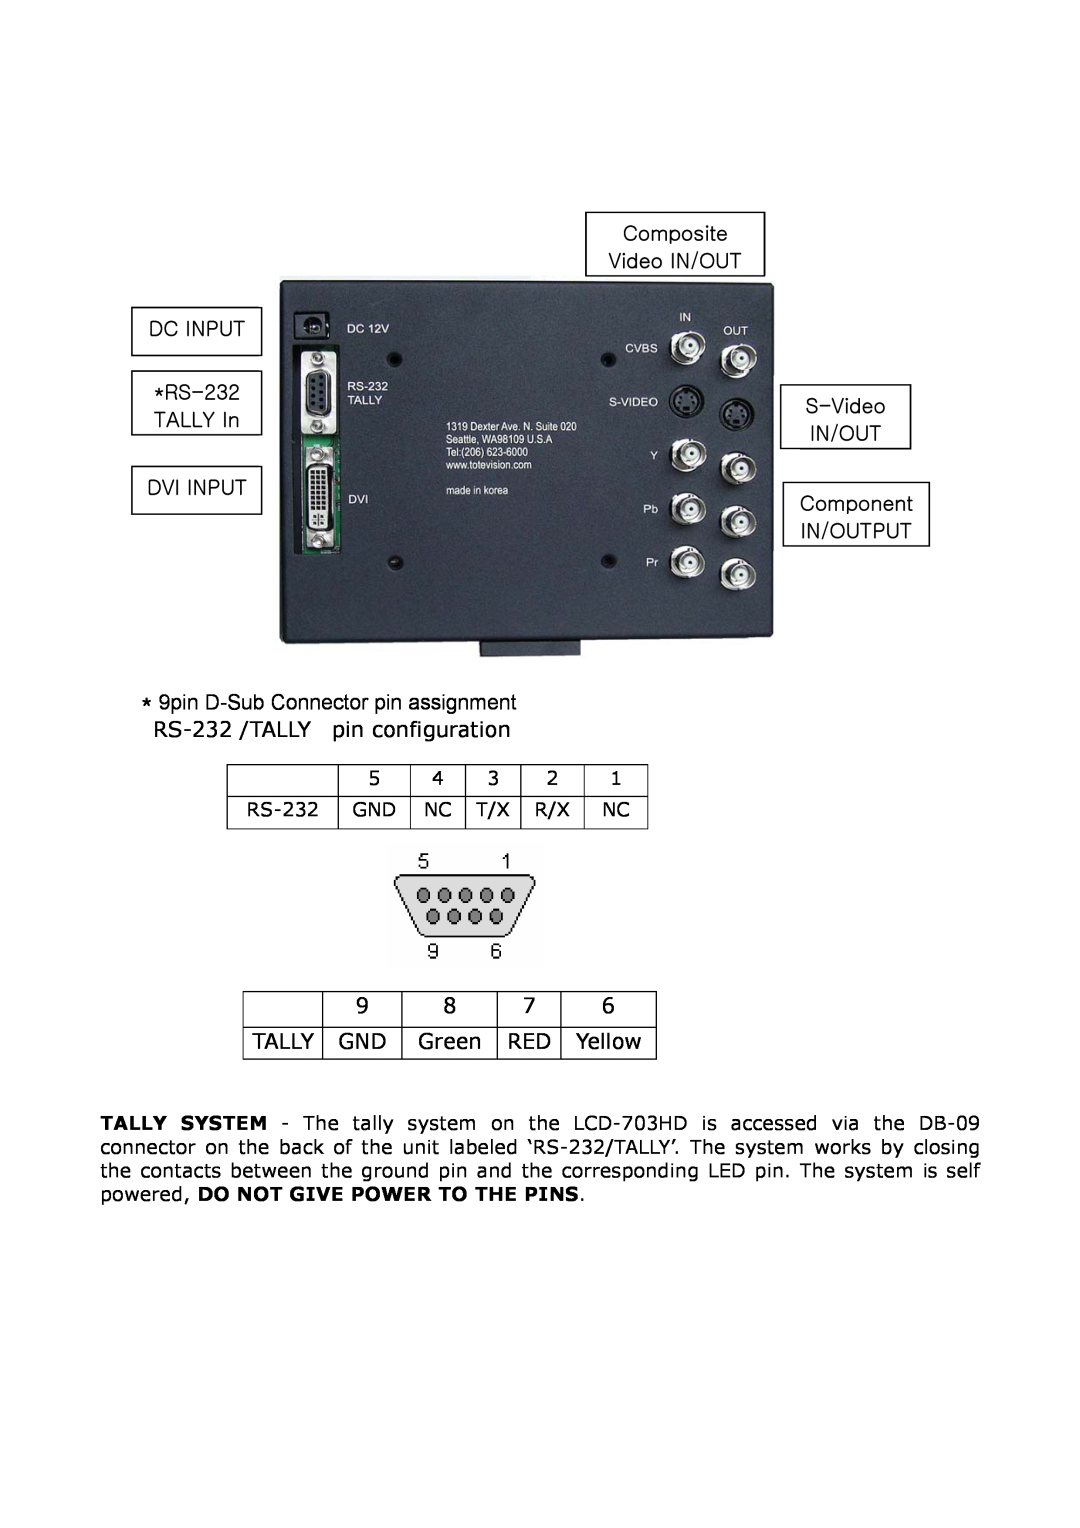 Tote Vision LCD-703HD manual Composite Video IN/OUT DC INPUT RS-232 TALLY In DVI INPUT, 9pin D-Sub Connector pin assignment 